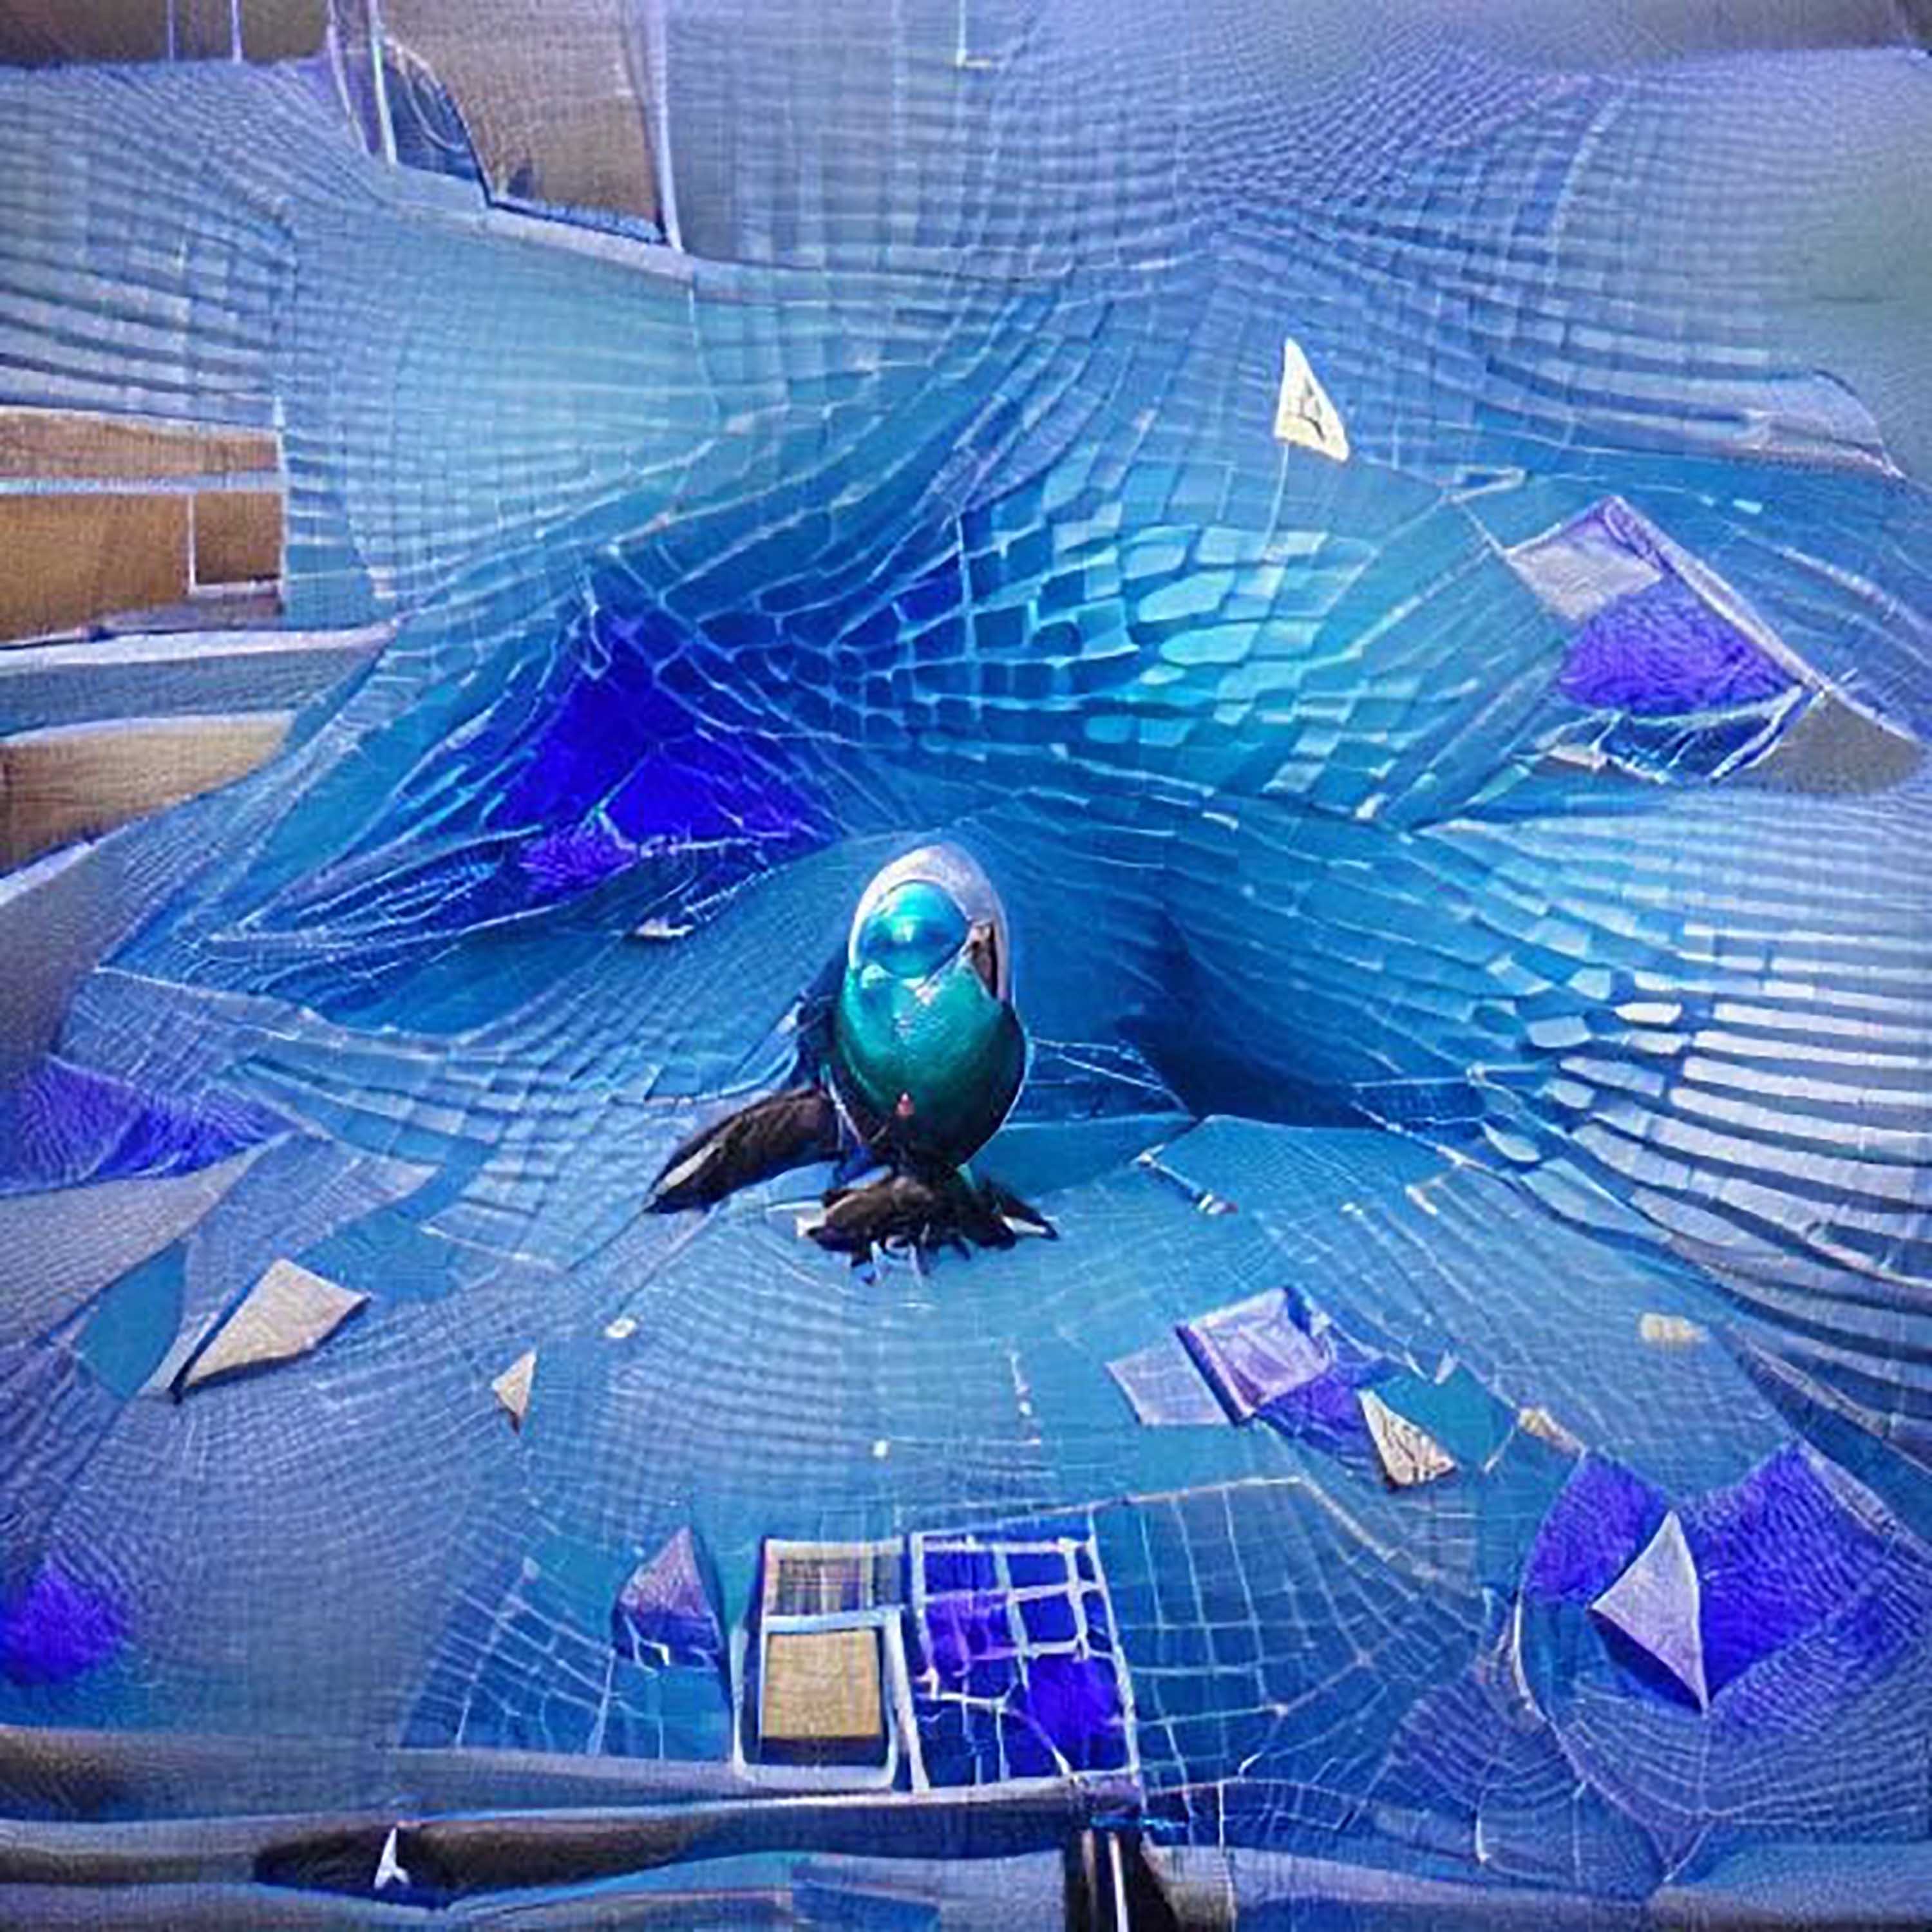 #110 - "I hatched from the Cube, unlatched the Doom Seal, cracked it with my blue teal feather tips"